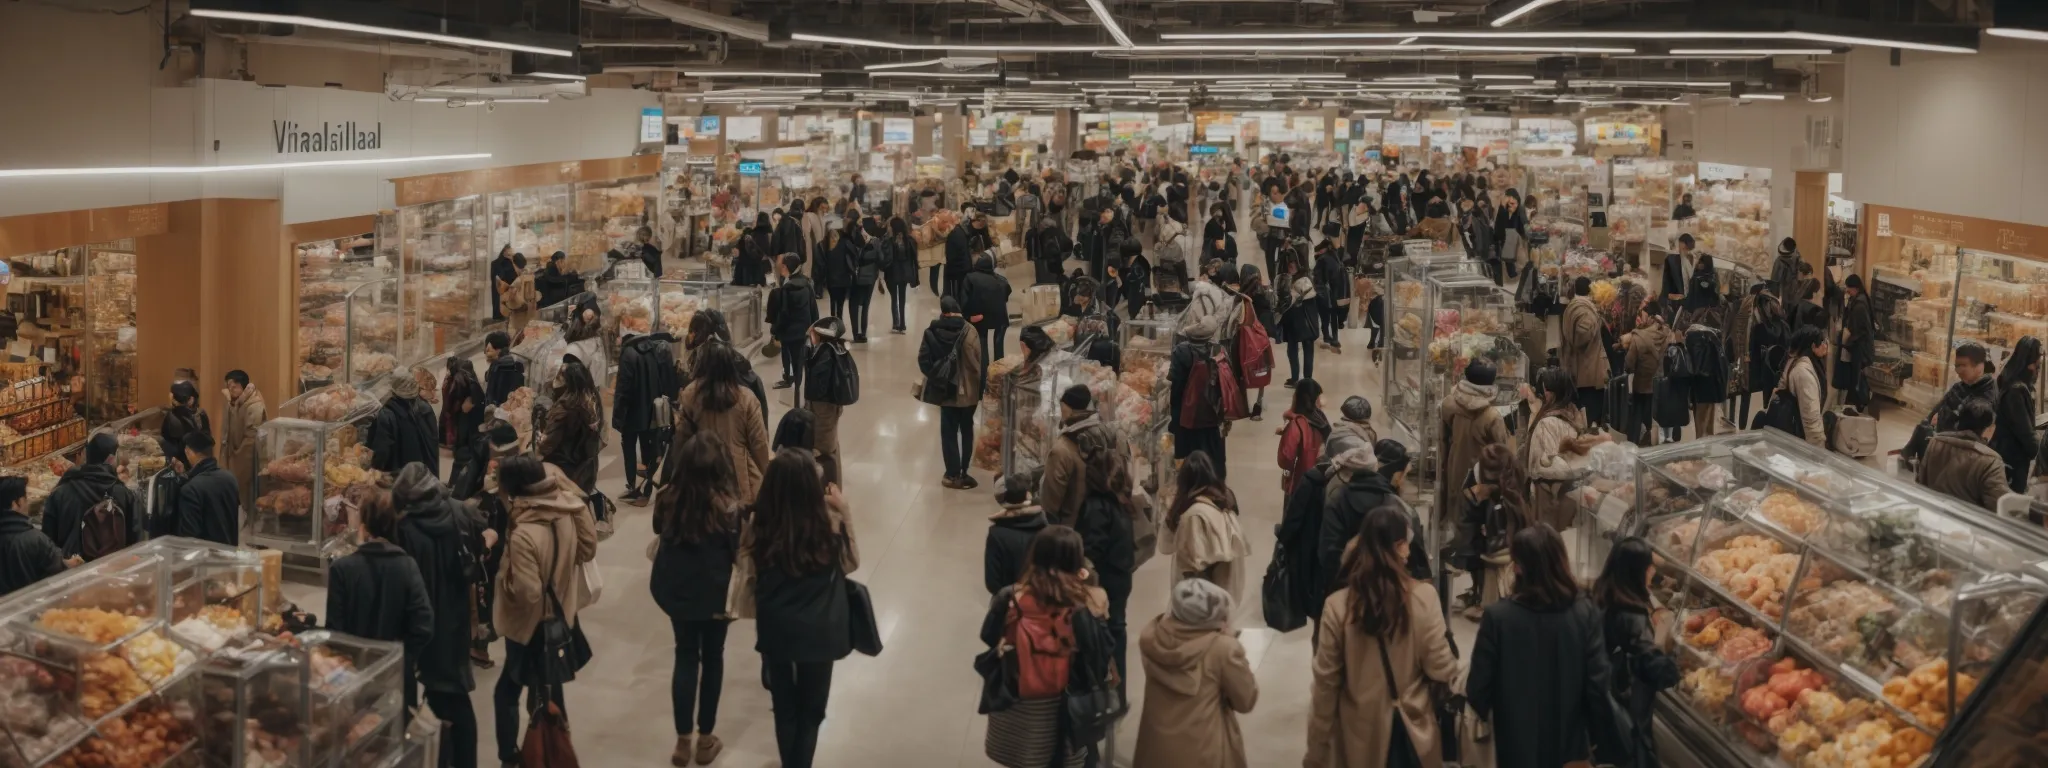 a wide-angle view of busy shoppers navigating through an expansive digital marketplace filled with diverse online stores.